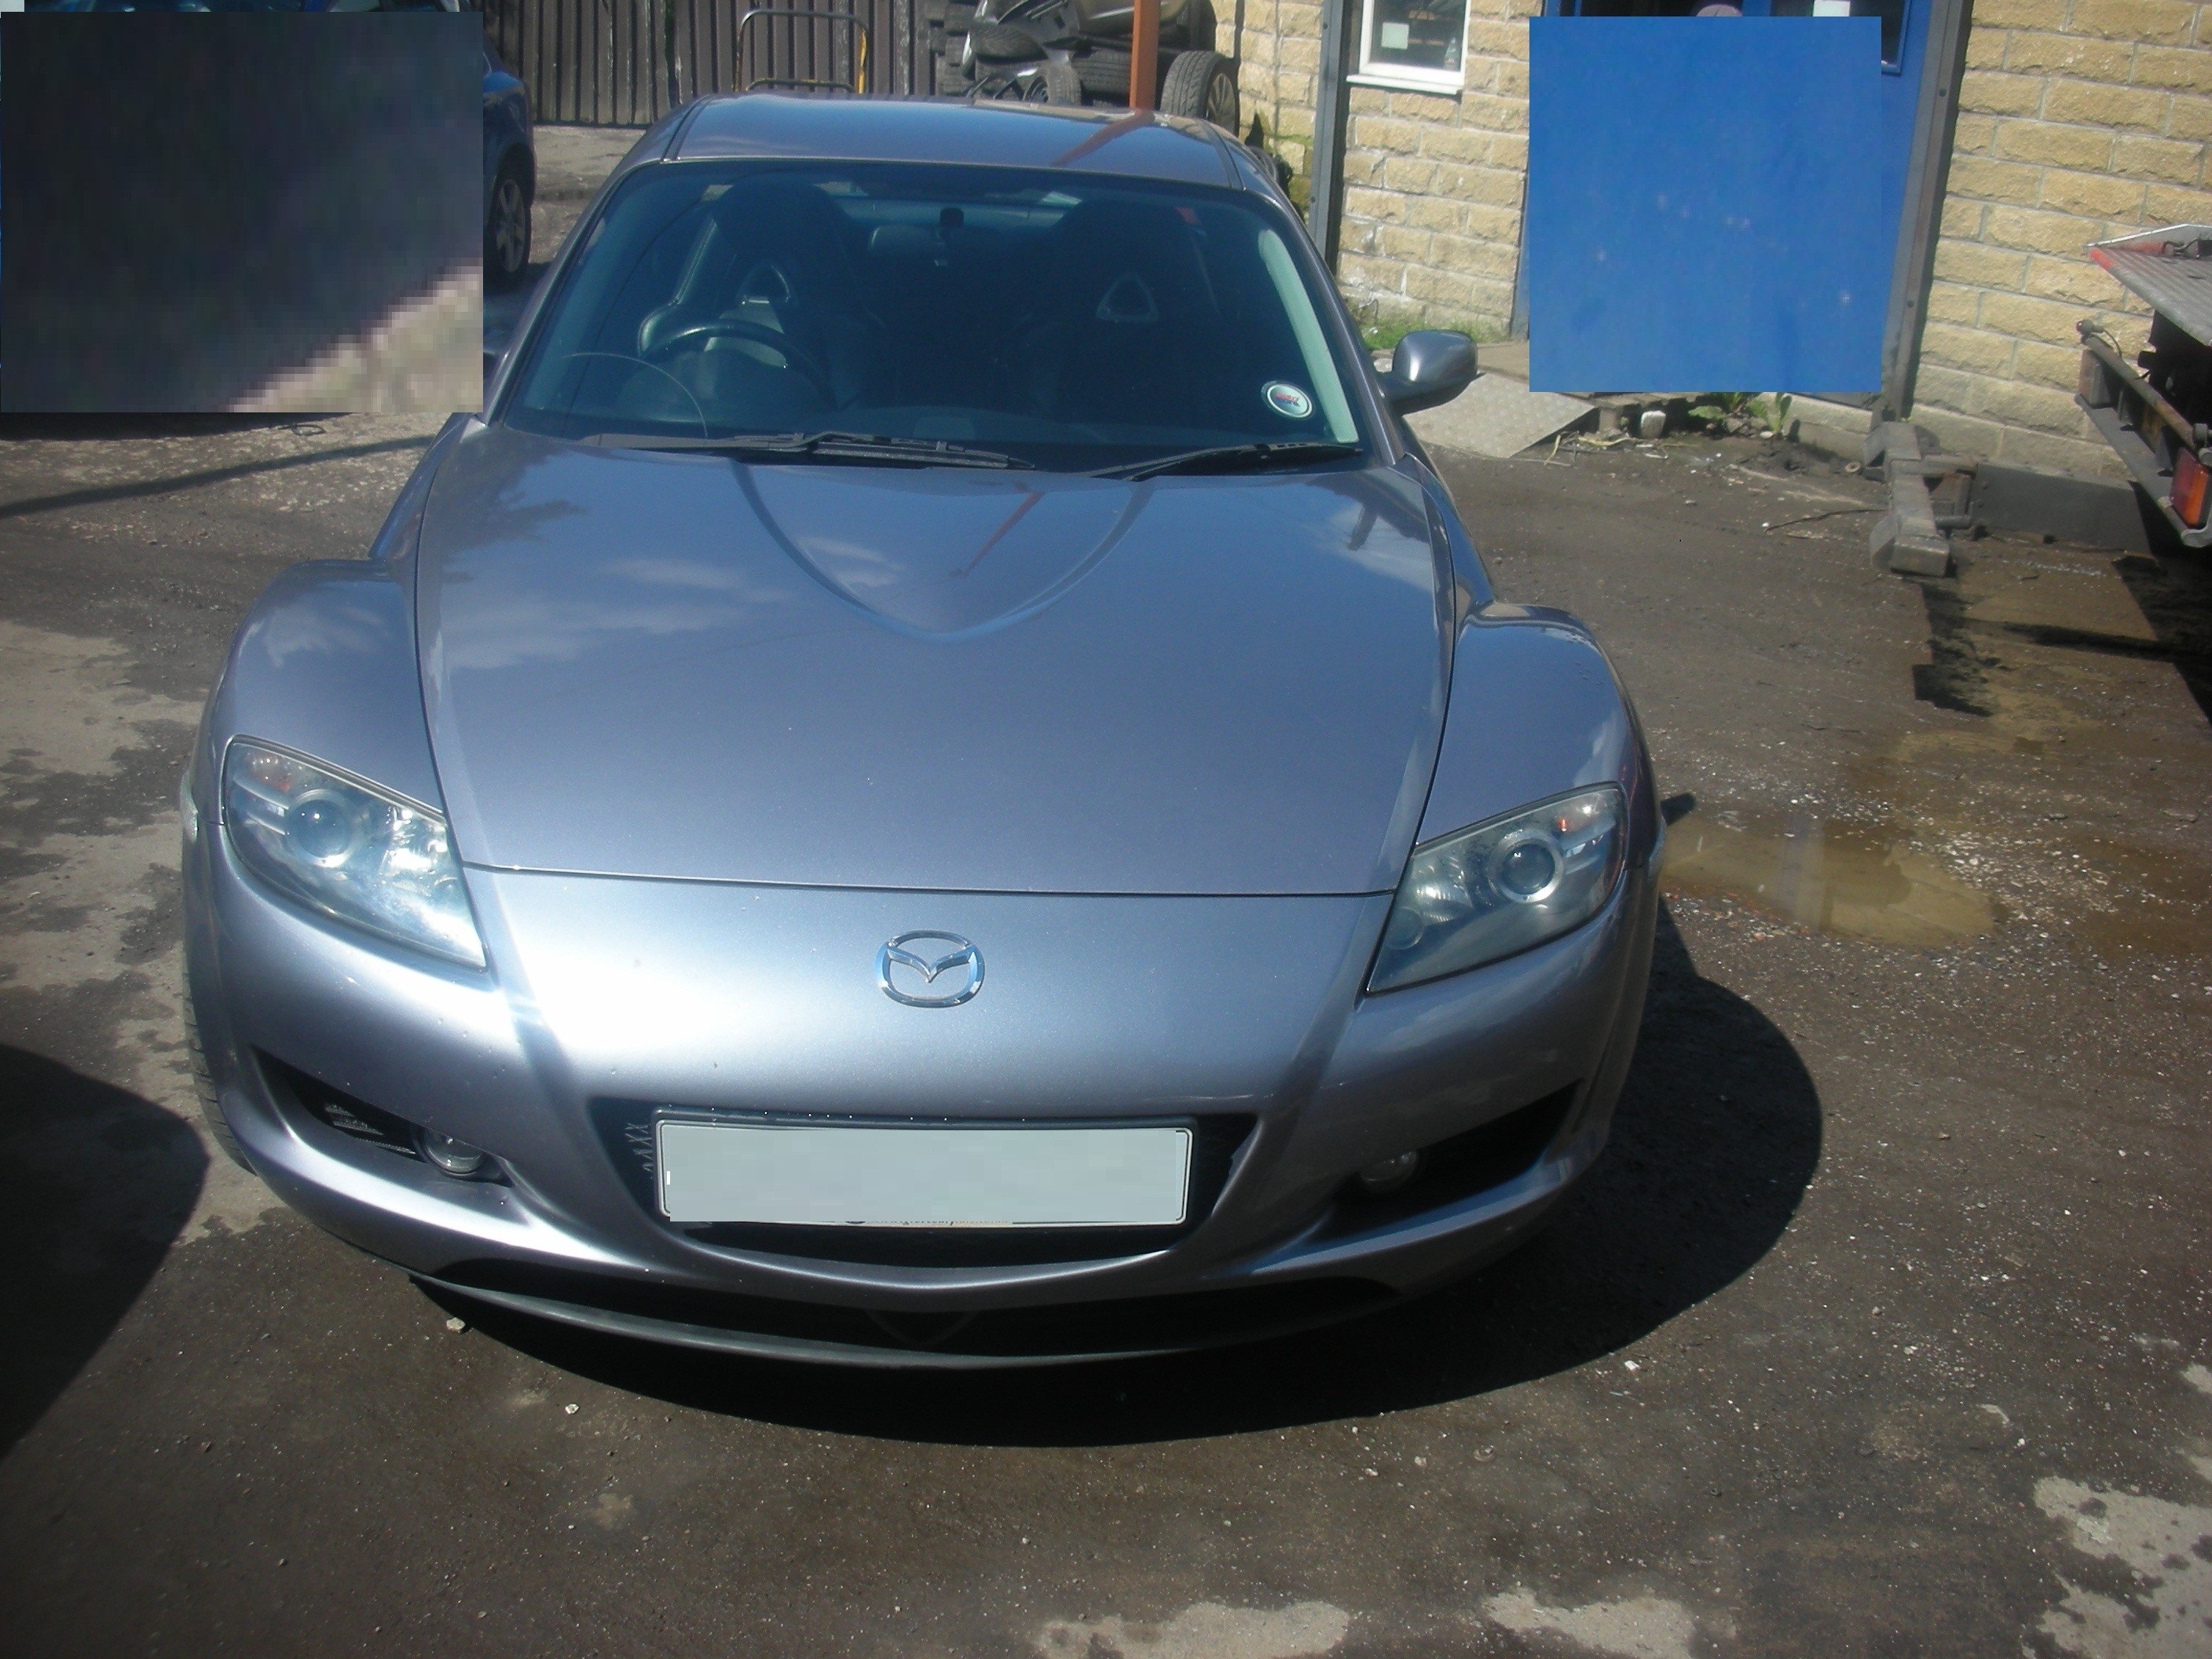 MAZDA RX-8 RX8 2600 CC 192 BHP 5 SPEED MANUAL BREAKING SPARES NOT SALVAGE 2004